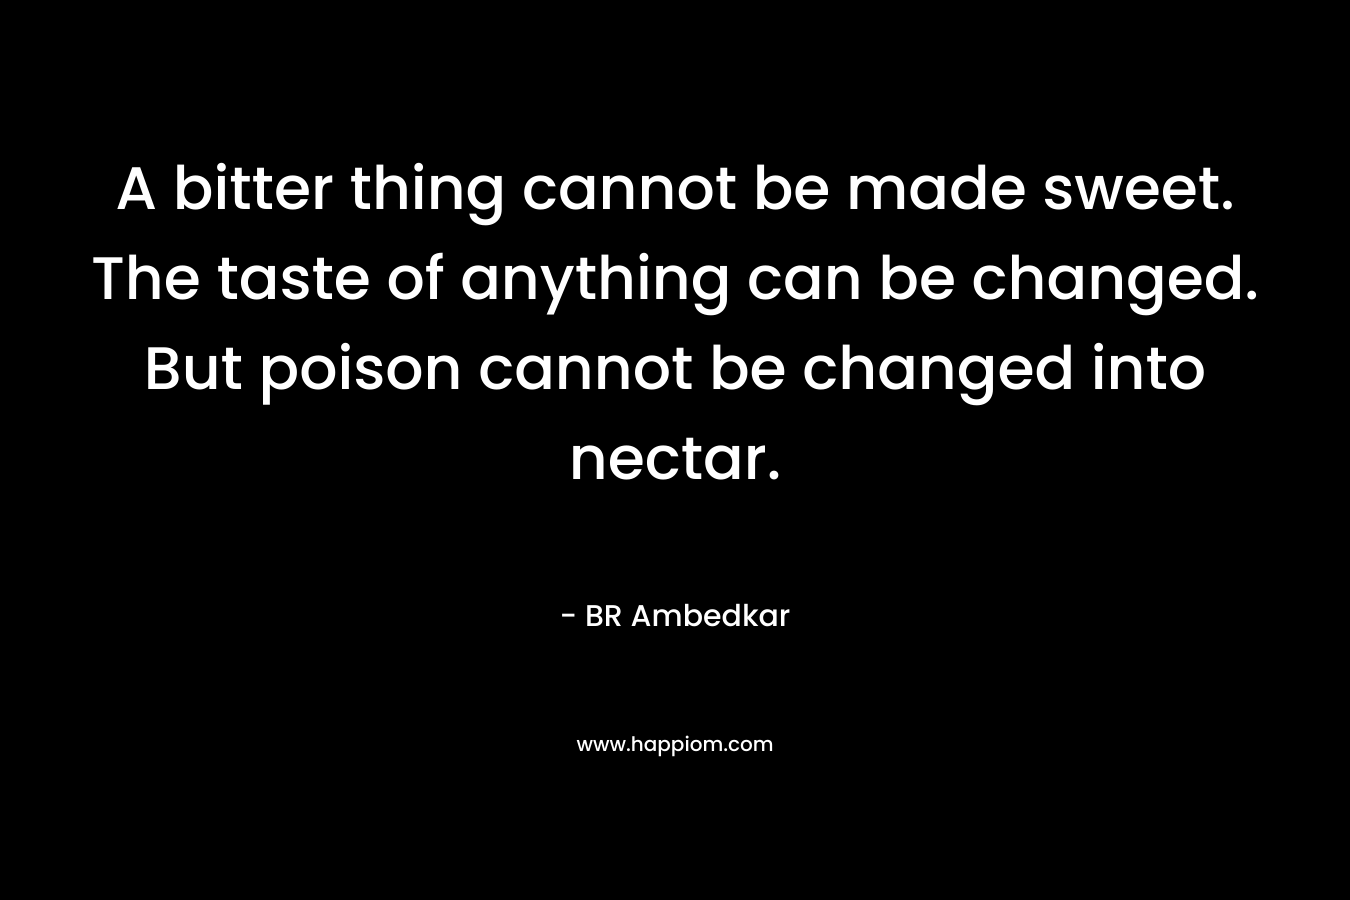 A bitter thing cannot be made sweet. The taste of anything can be changed. But poison cannot be changed into nectar.